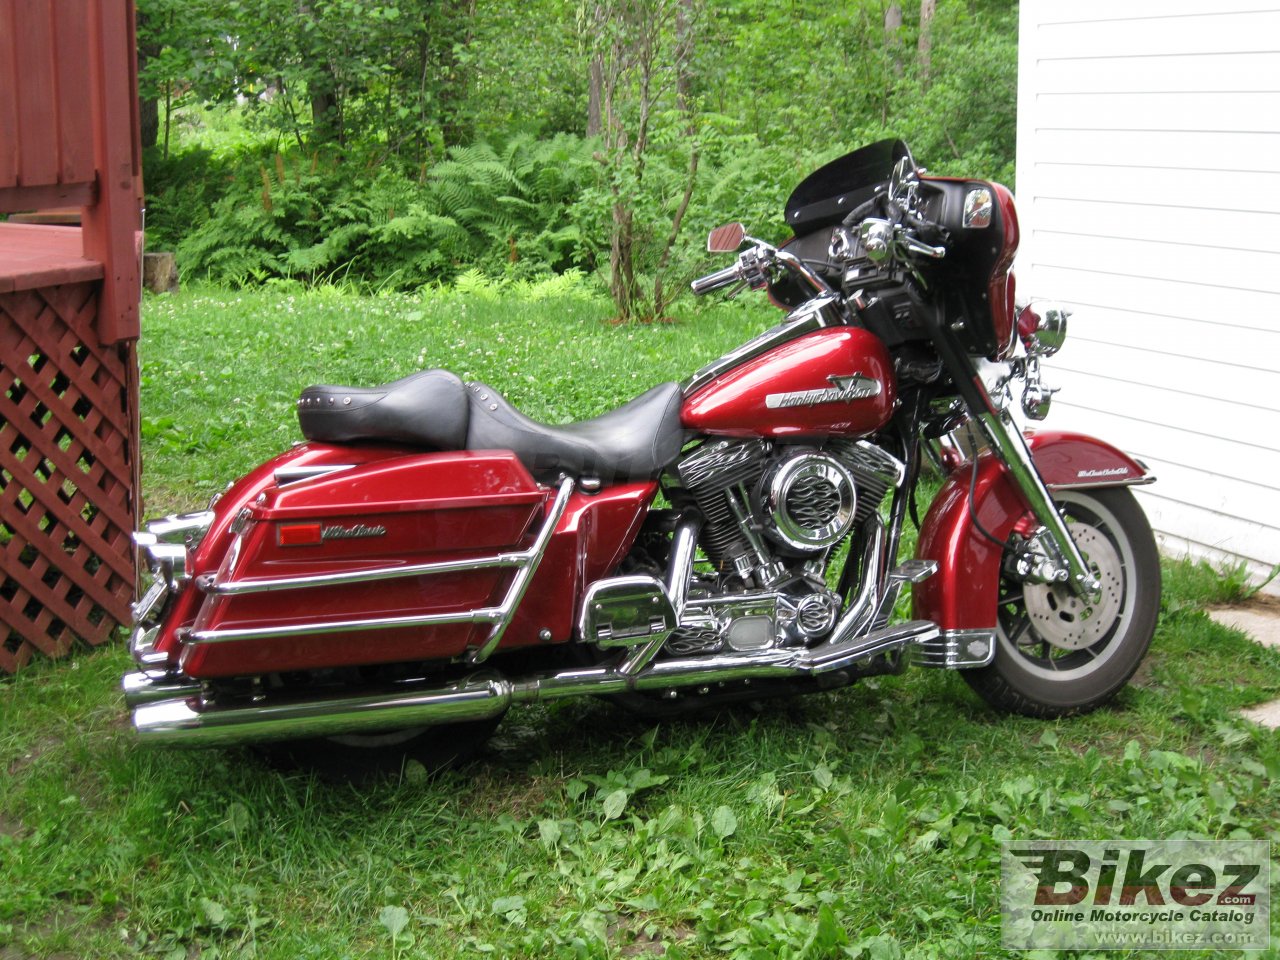 Harley-Davidson FLHTC 1340 Electra Glide Classic (reduced effect)